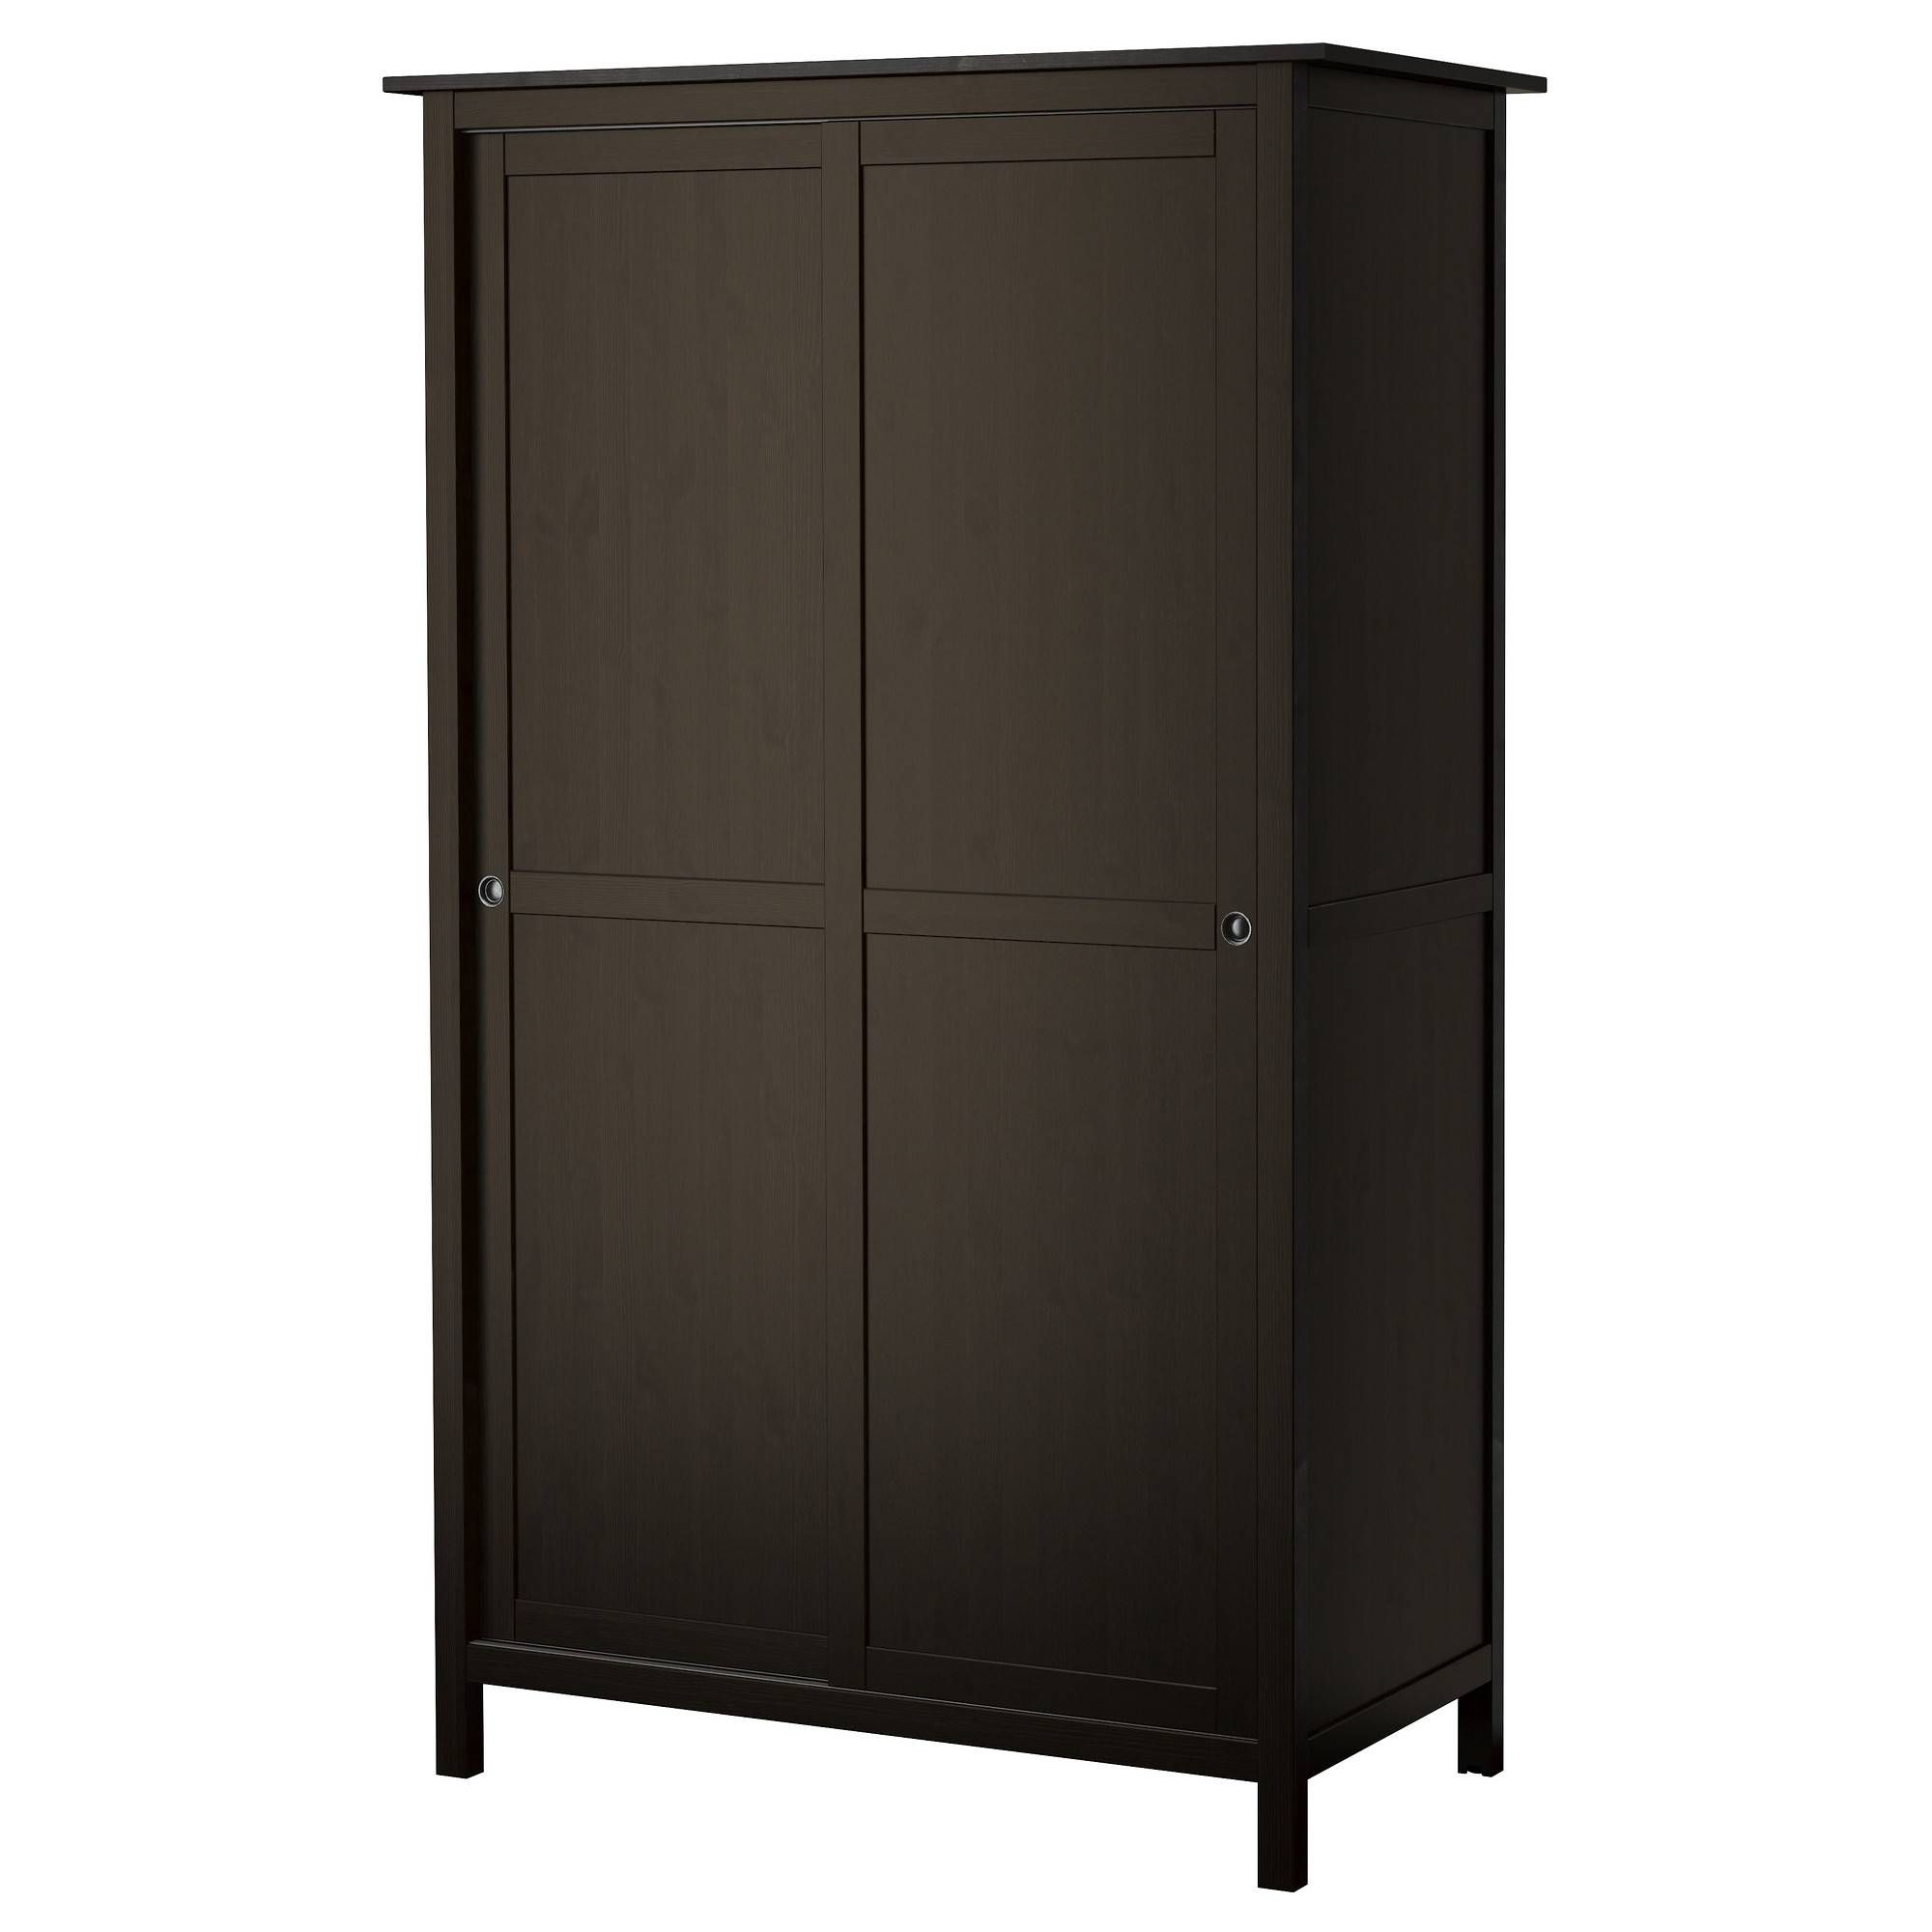 Wardrobes, Armoires & Closets – Ikea Throughout Wardrobes With Shelves (View 30 of 30)